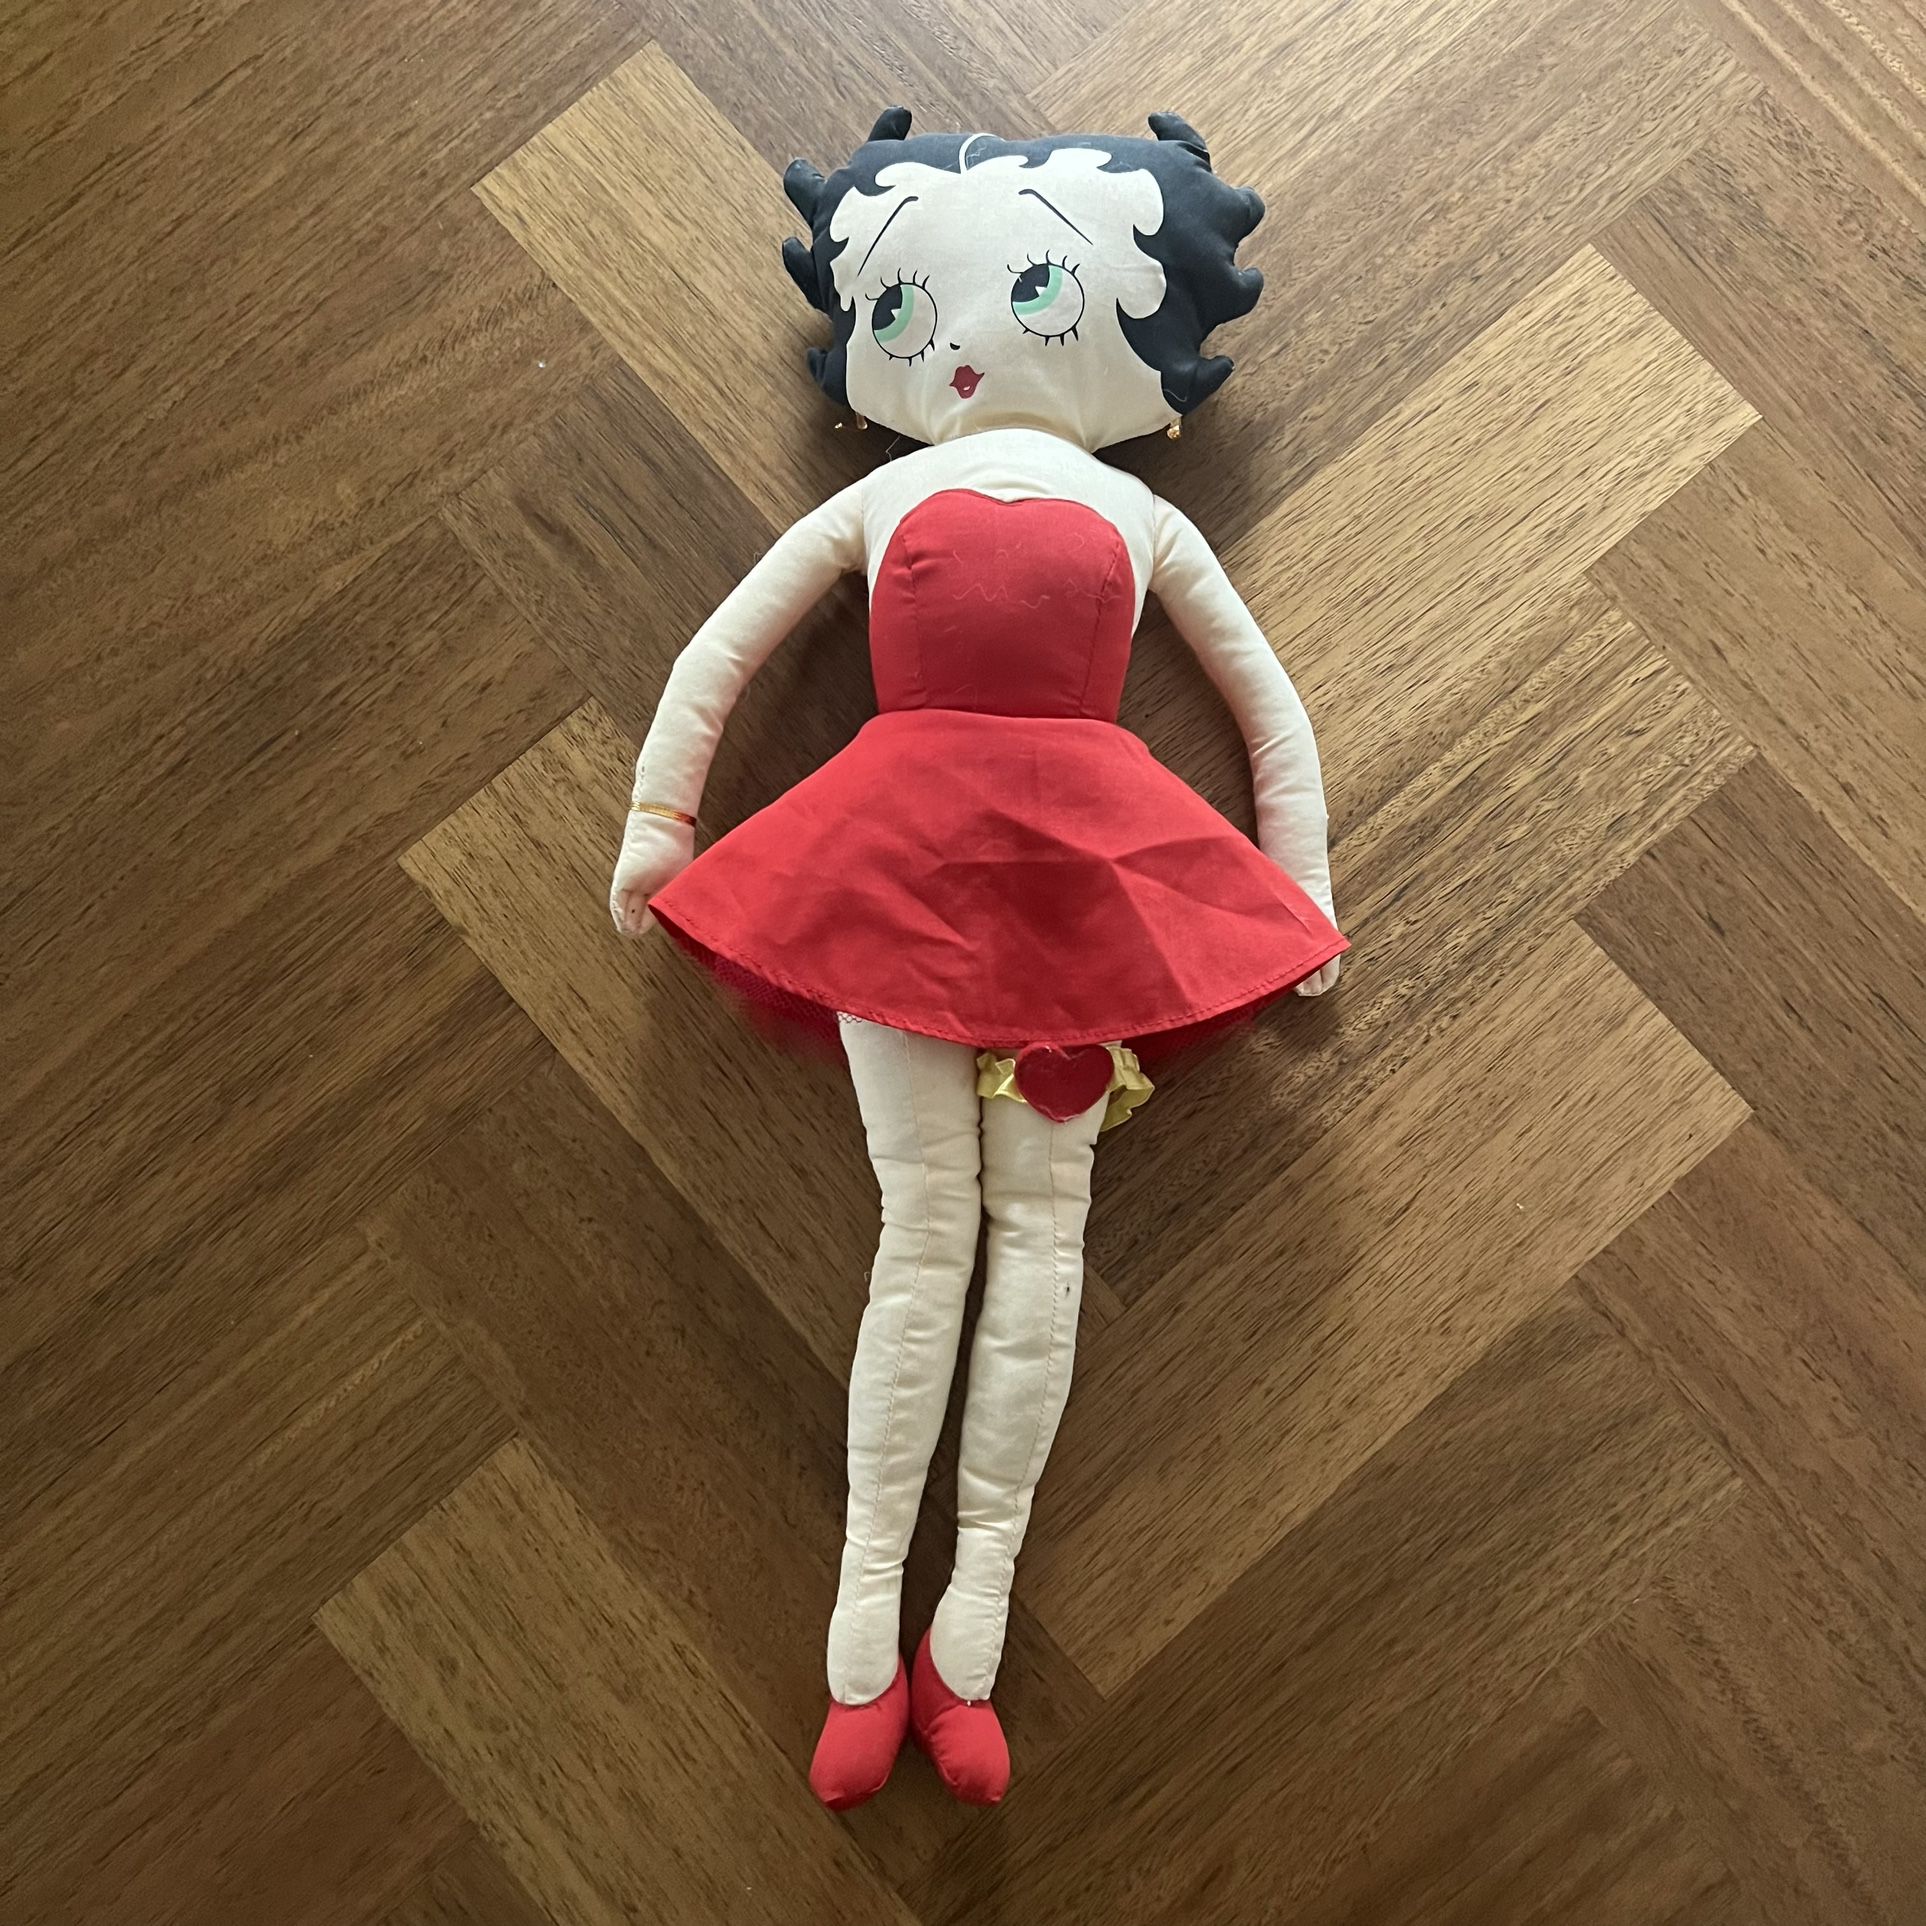 Play by Play Betty Boop 12” Plush Figure Toy